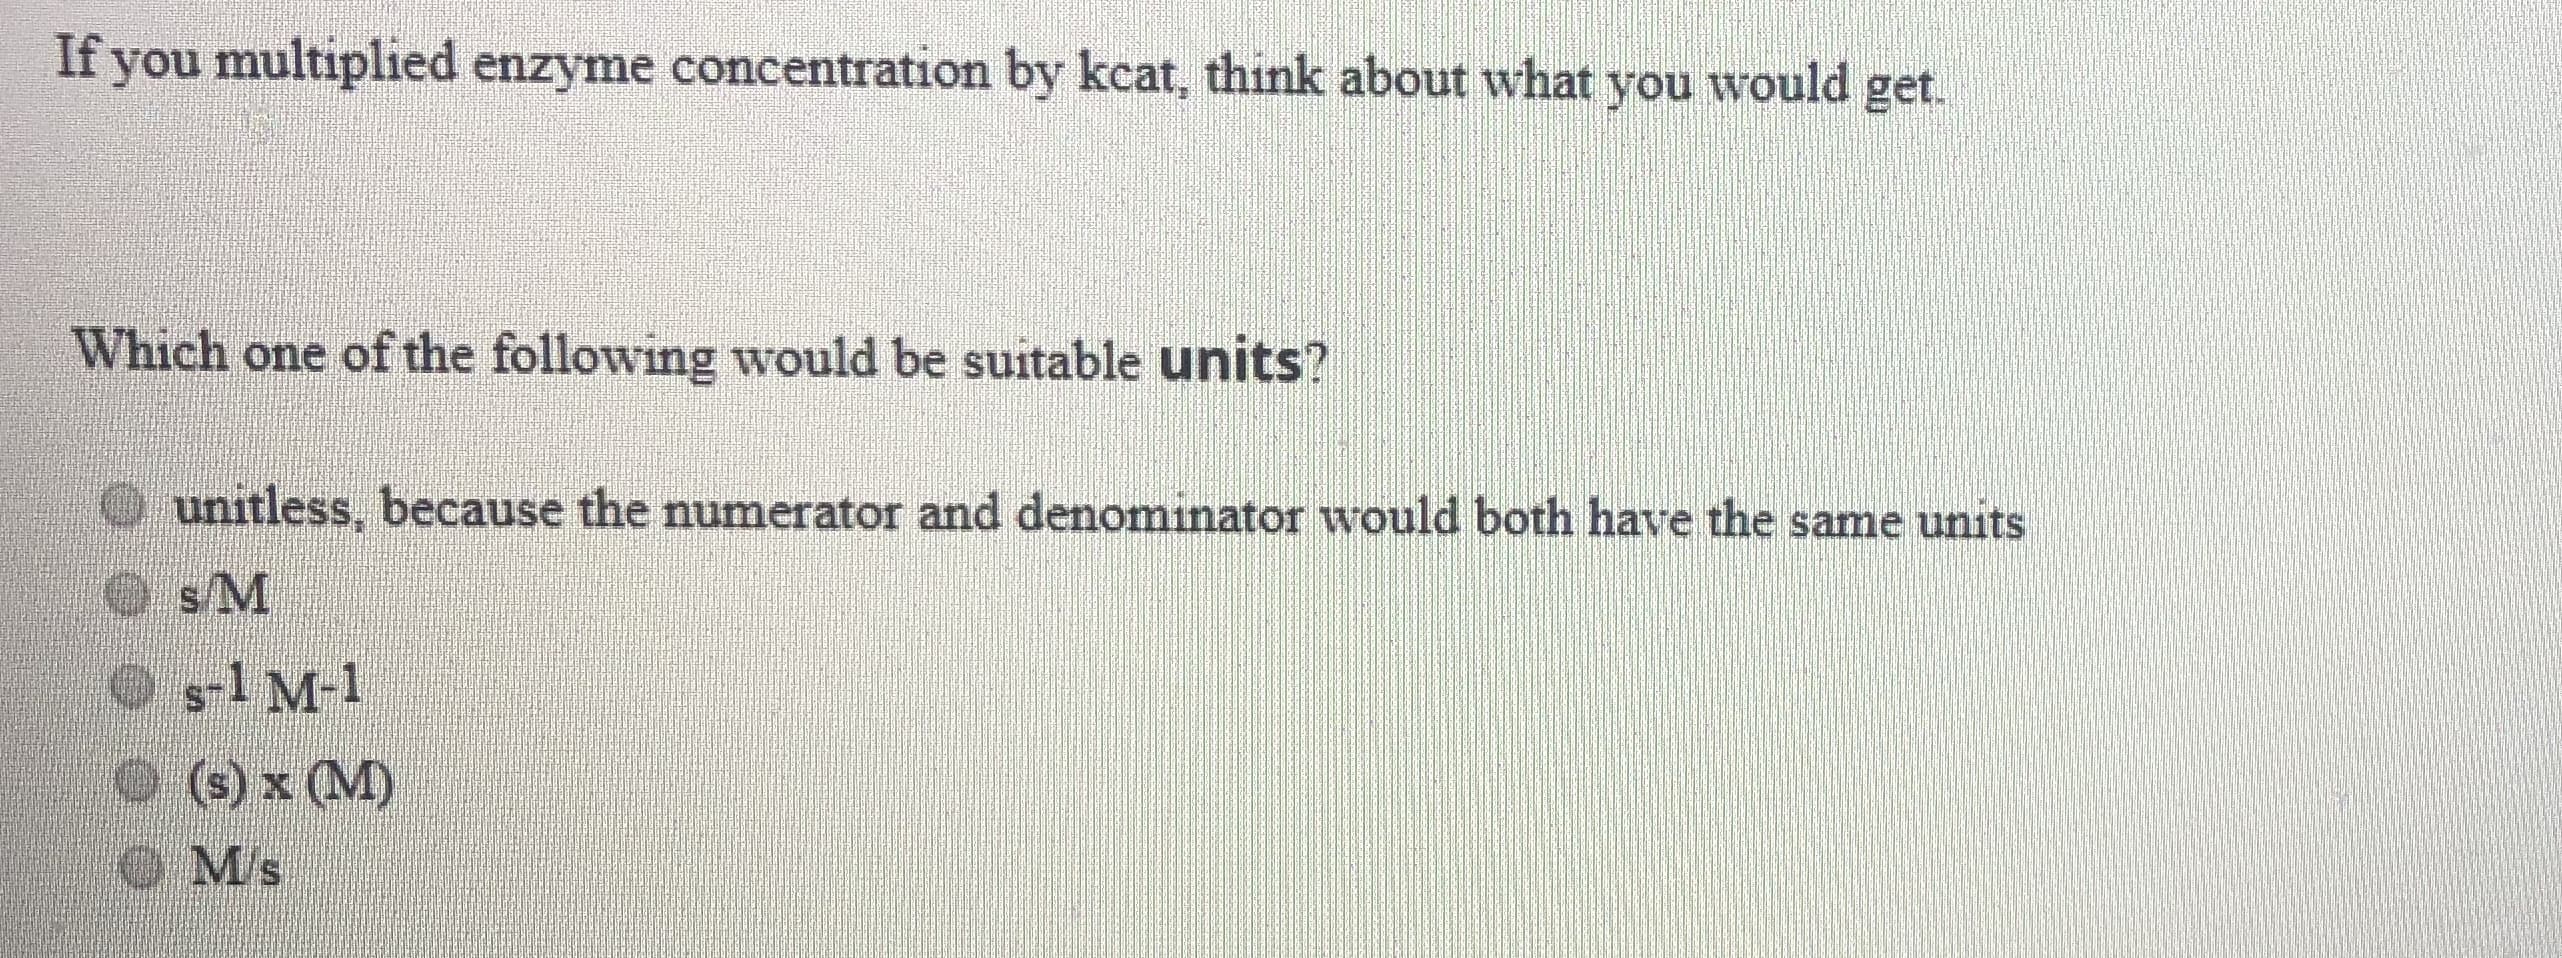 If you multiplied enzyme concentration by kcat, think about what you would get.
Which one of the following would be suitable units?
unitless, because the numerator and denominator would both have the same units
O s1 M-1
(s) x (M)
O Ms
